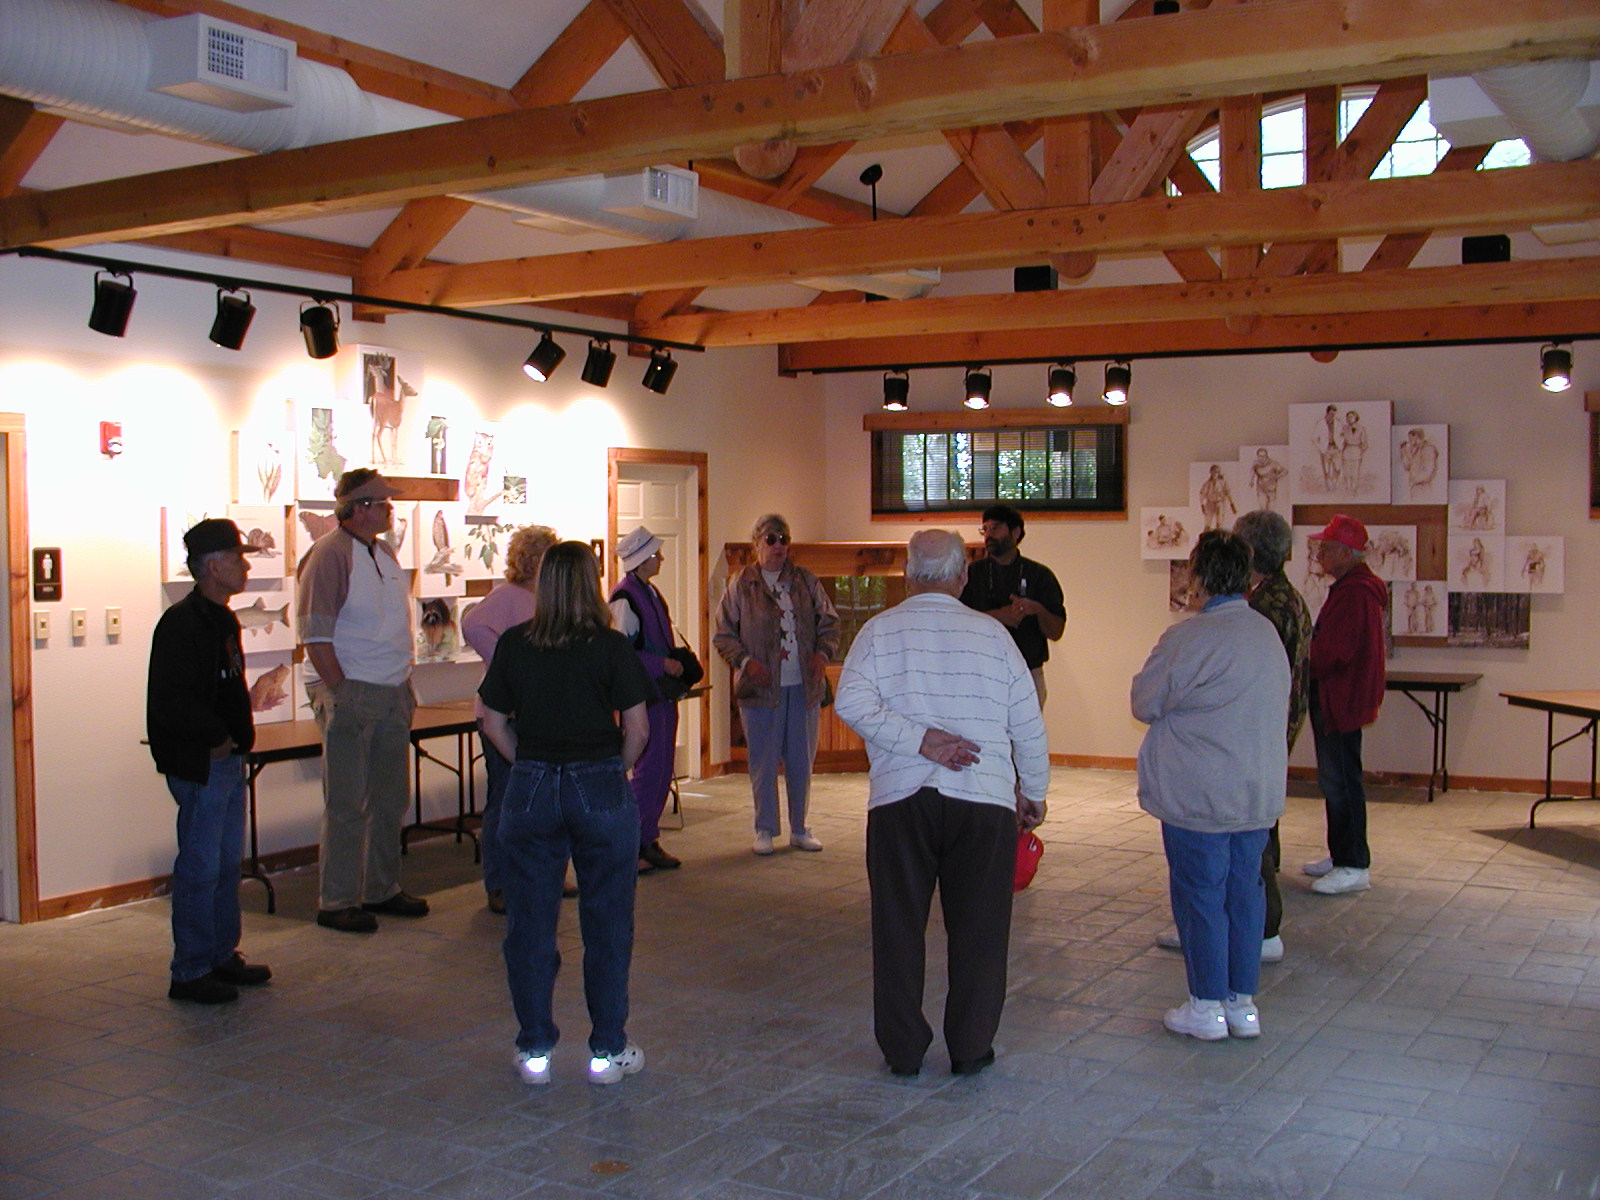 Interior of the Amherst Beaver Creek Visitor Center